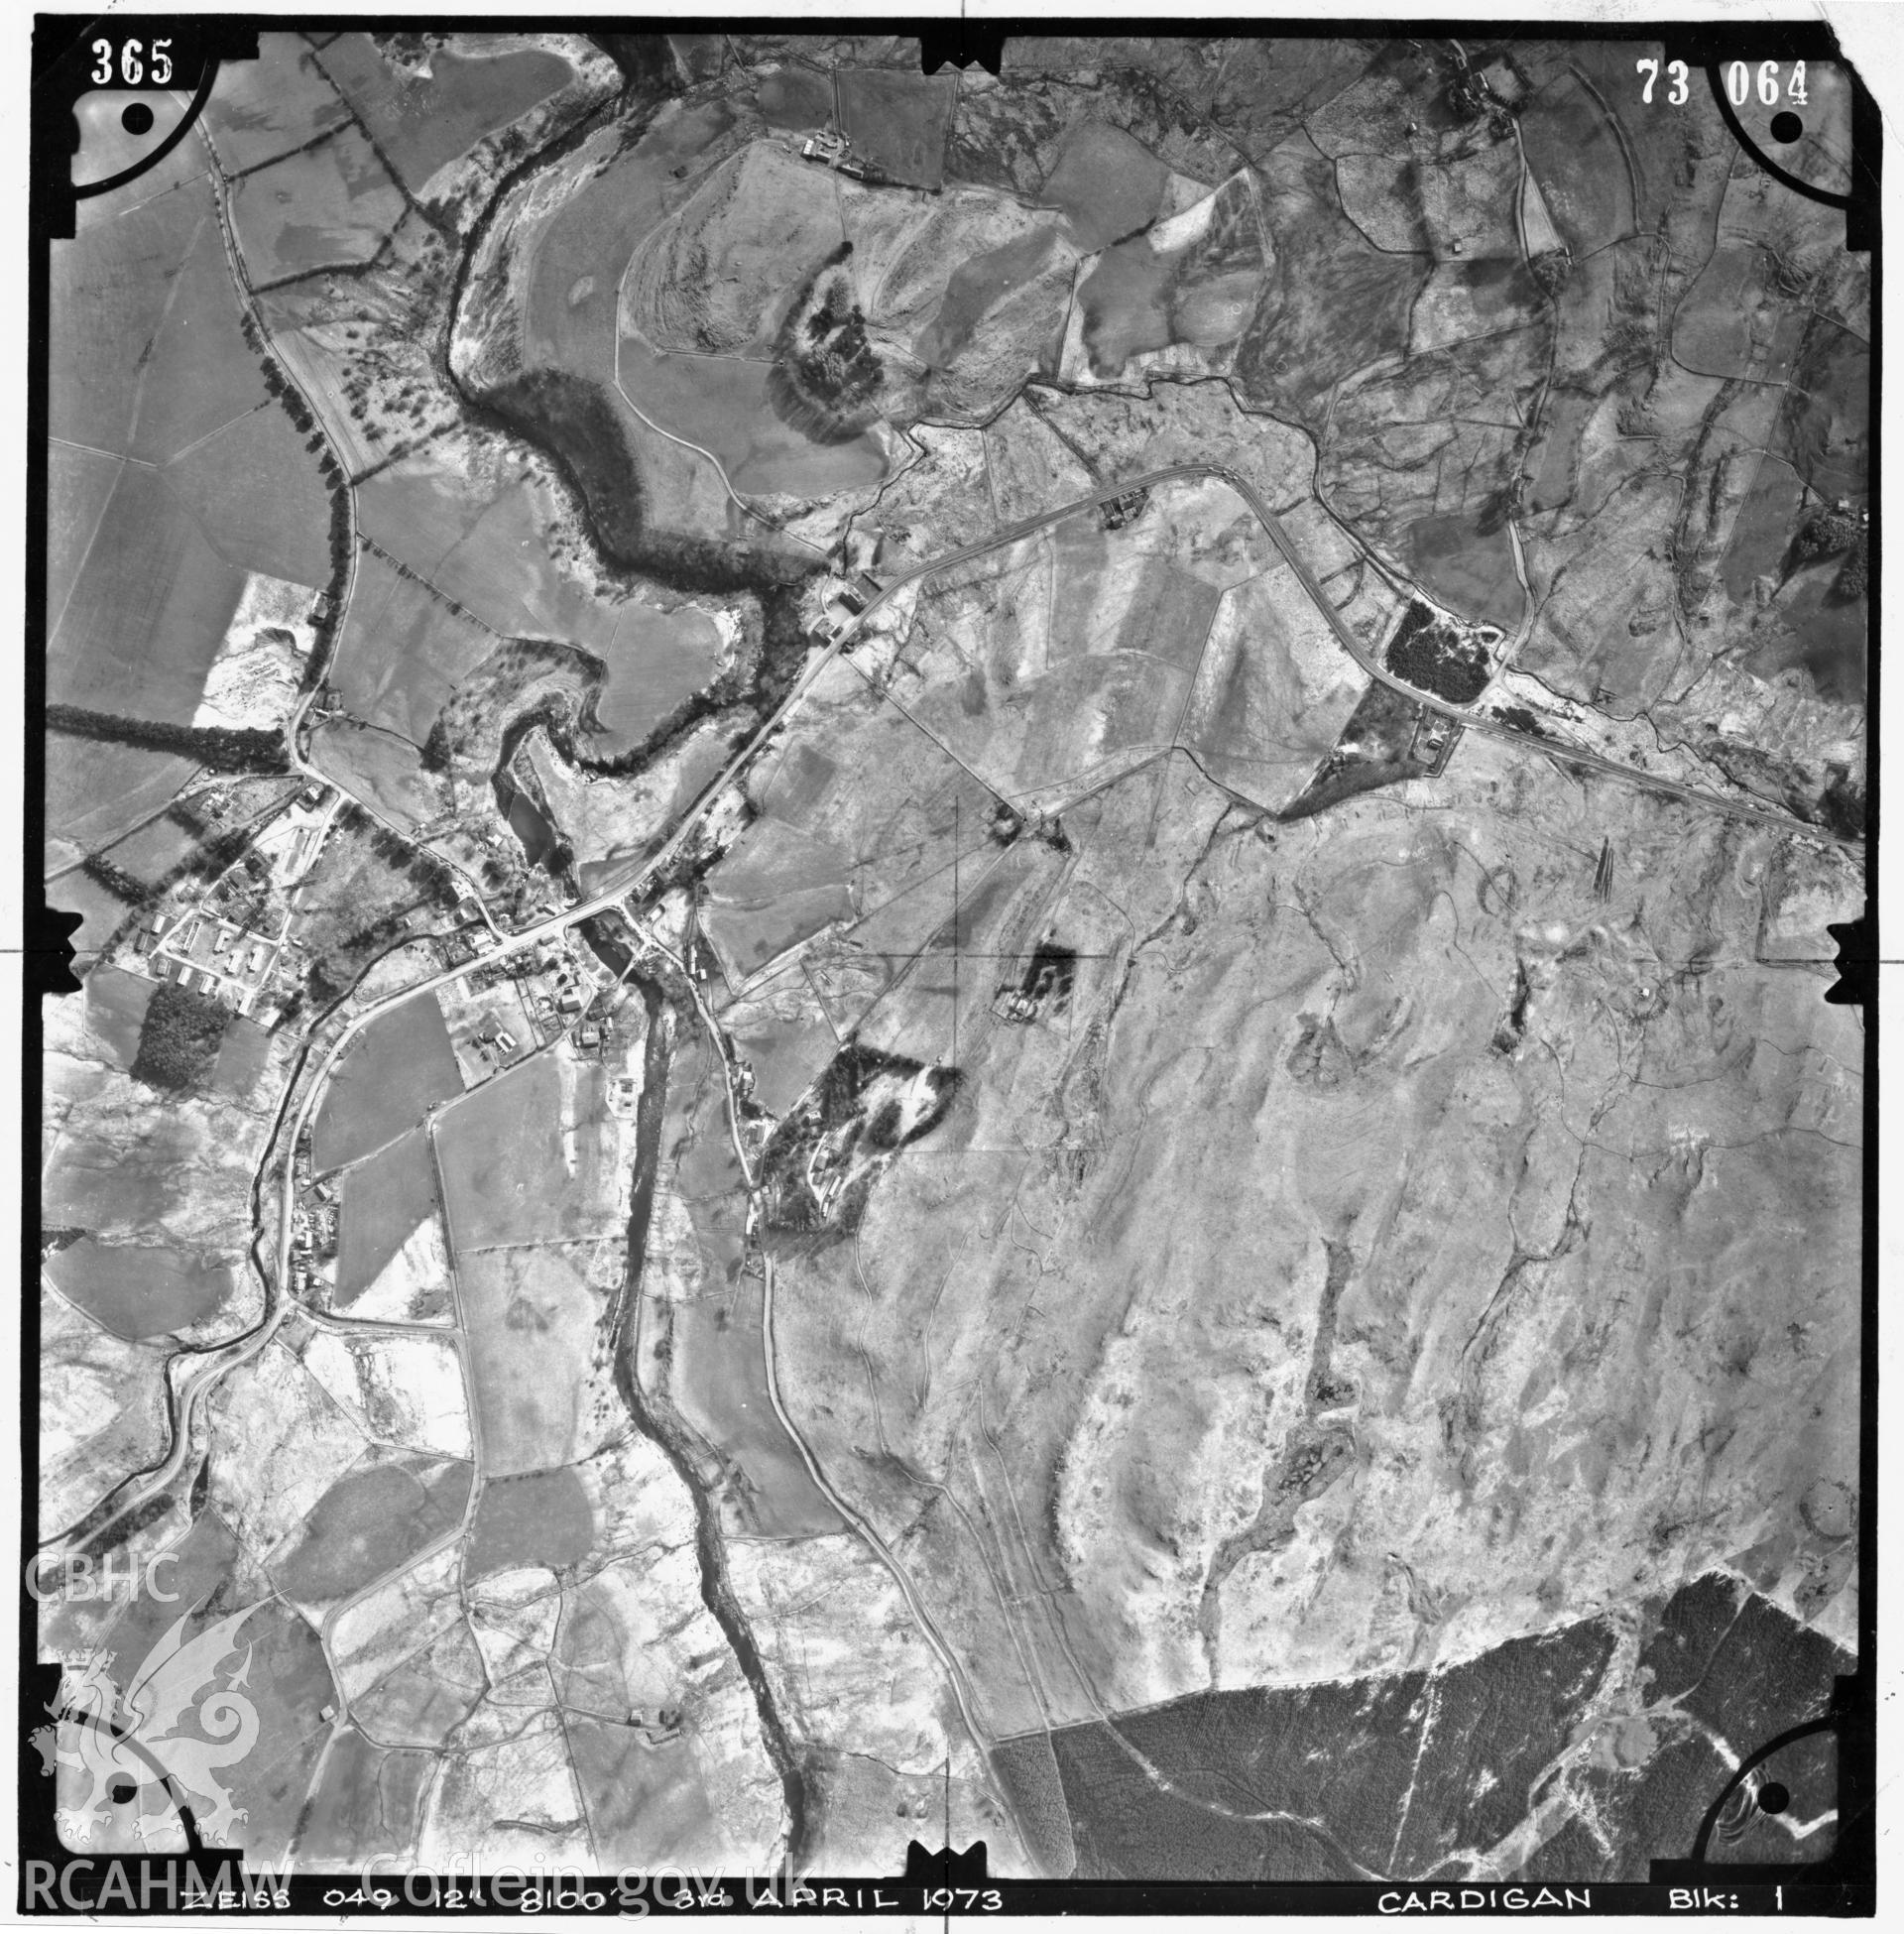 Digitized copy of an aerial photograph showing Ponterwyd area, taken by Ordnance Survey, 1973.